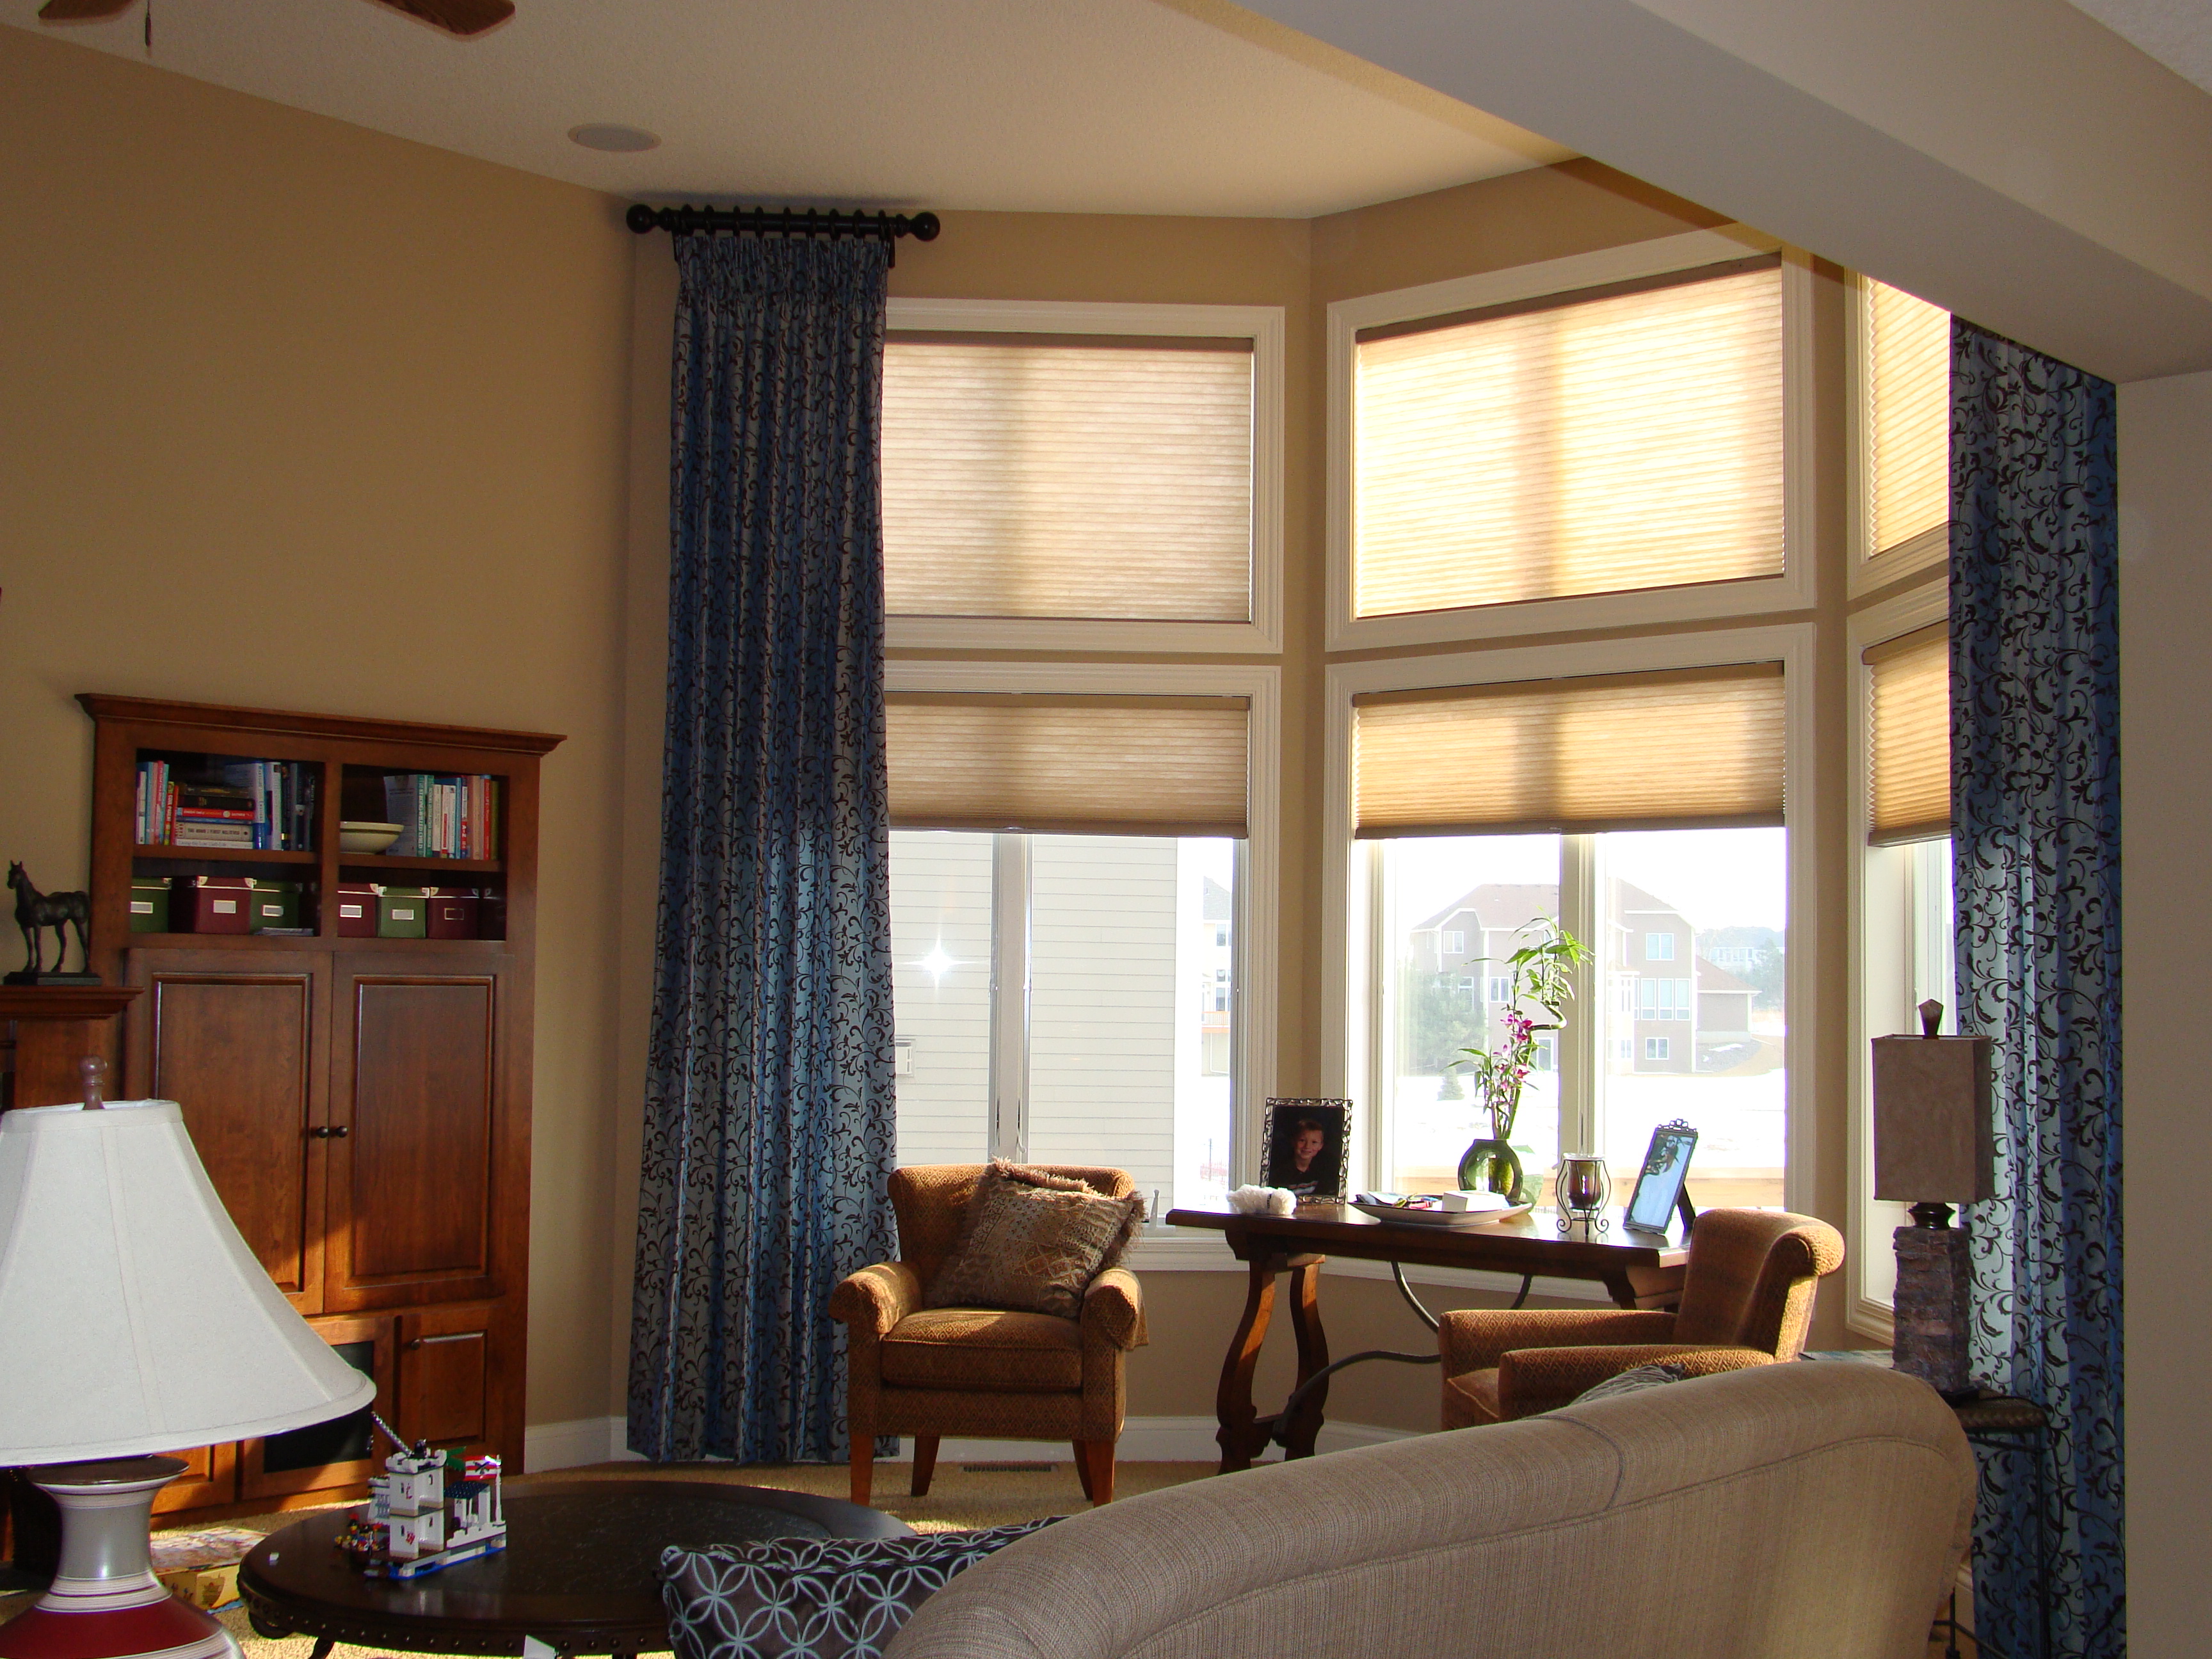 DECOR - BLINDS  WINDOW TREATMENTS - BLINDS  SHADES - AT THE HOME